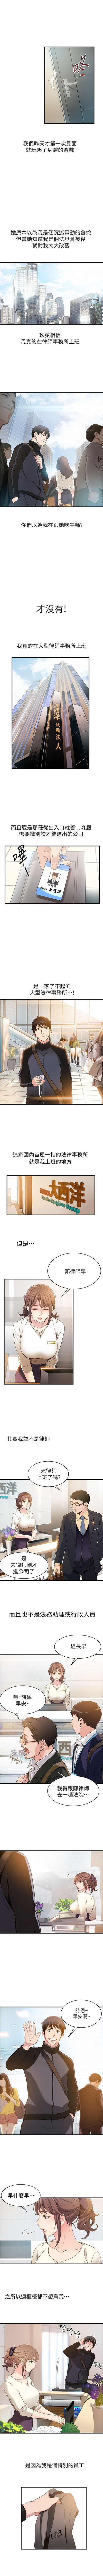 Smooth 弱點 1-90 官方中文（連載中） Home - Page 4